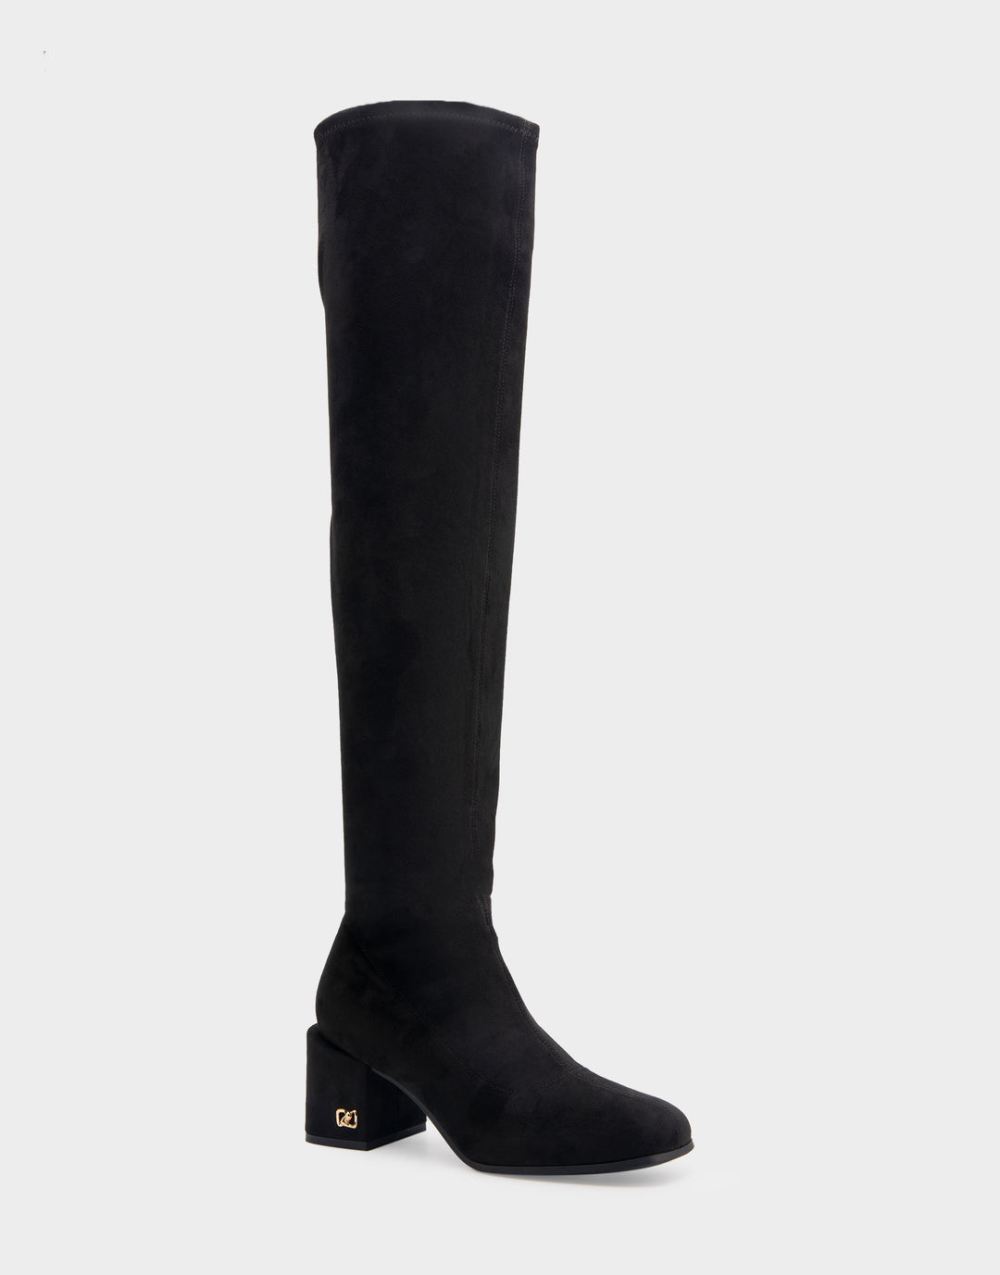 Women's | Oreti Black Stretch Faux Suede Block Heel Over The Knee Boot